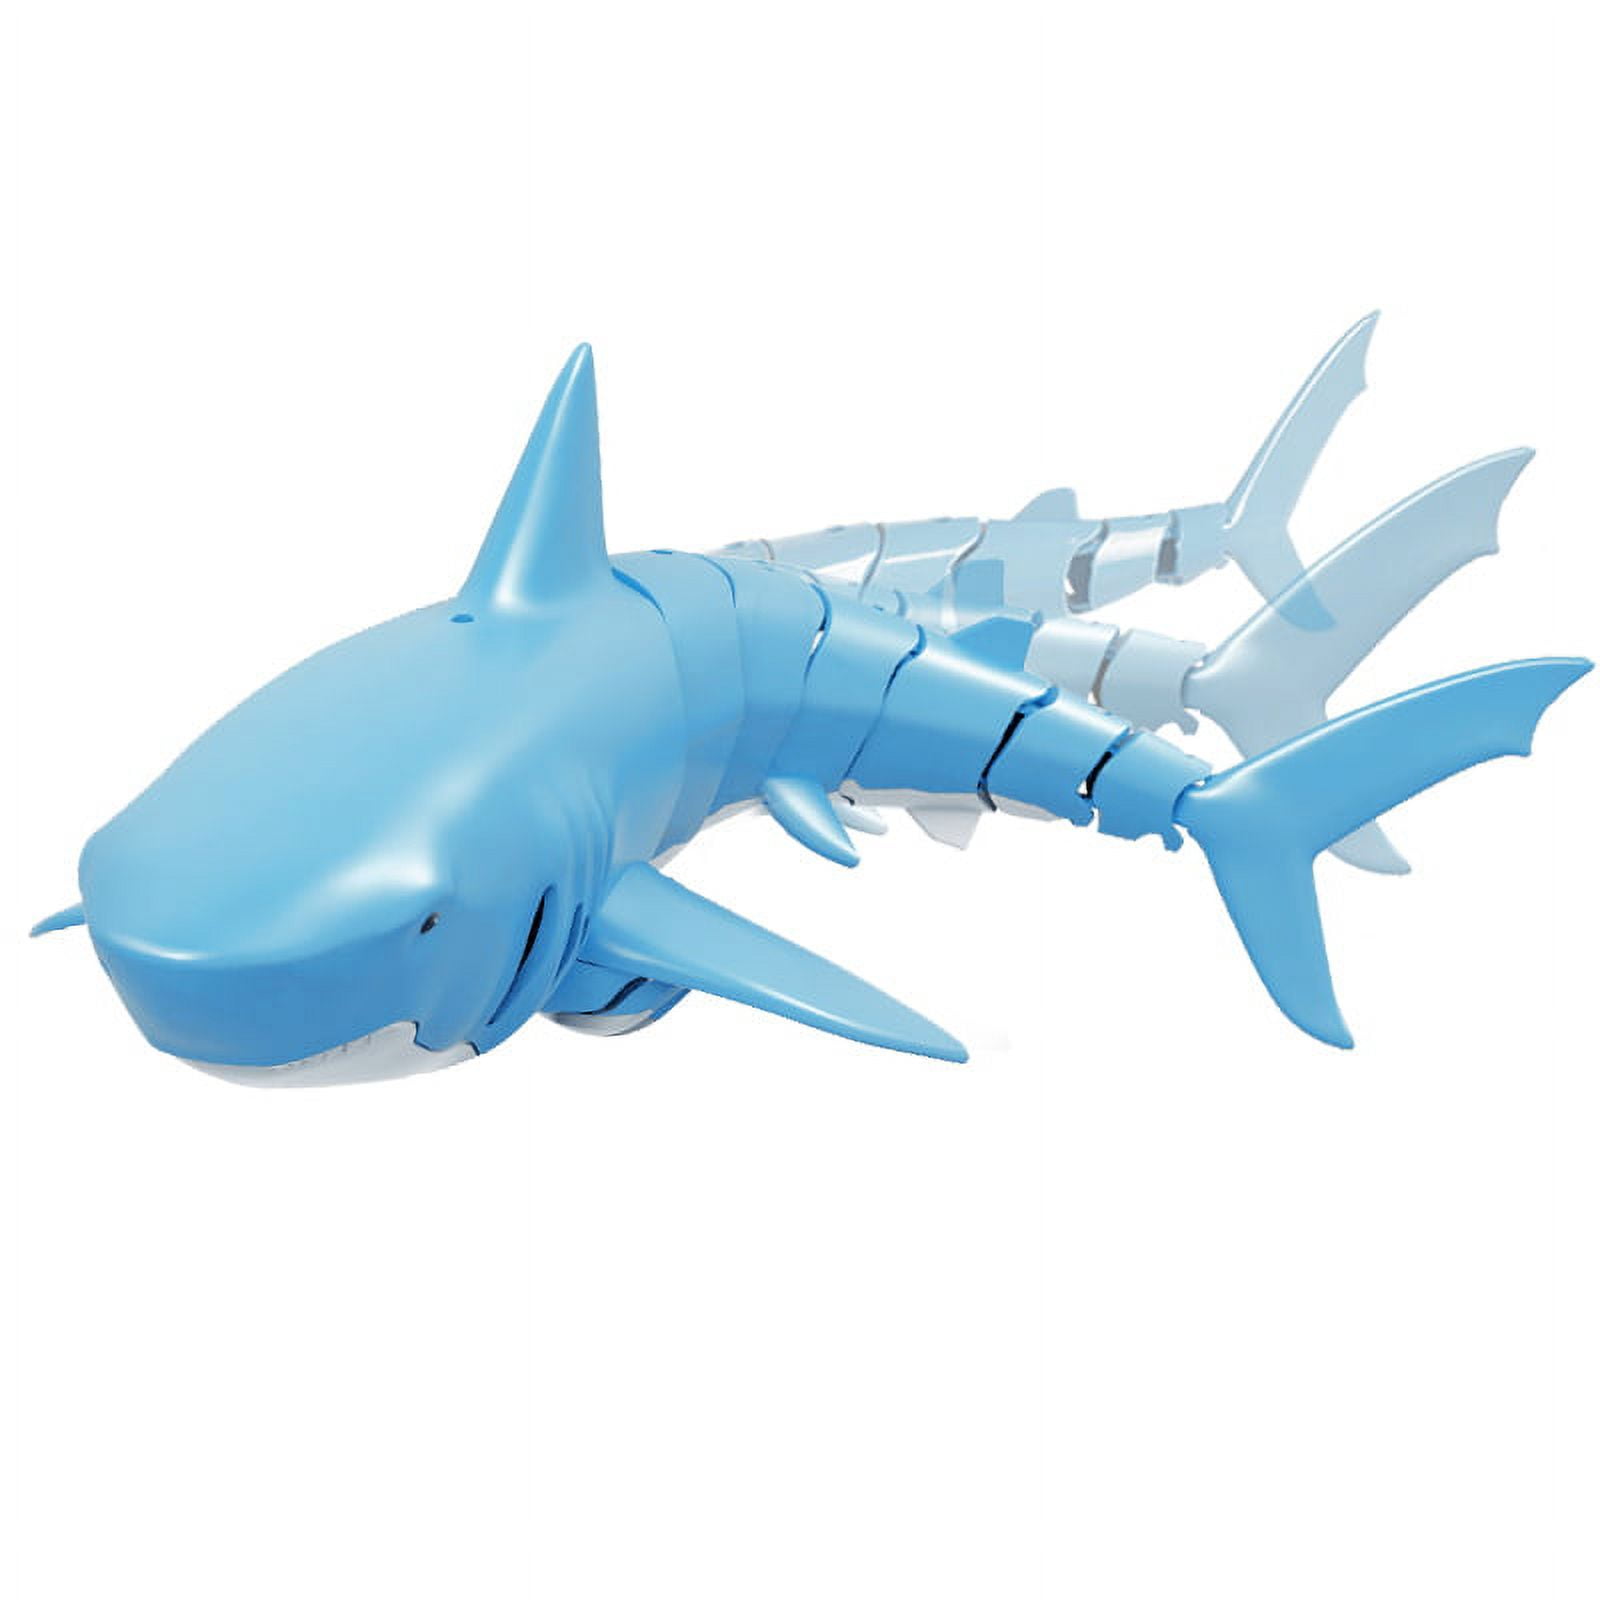 Only $29.99 Remote Control Shark Toys Swimming Fish RC Animal Toy Infrared  RC Fly Air Balloo